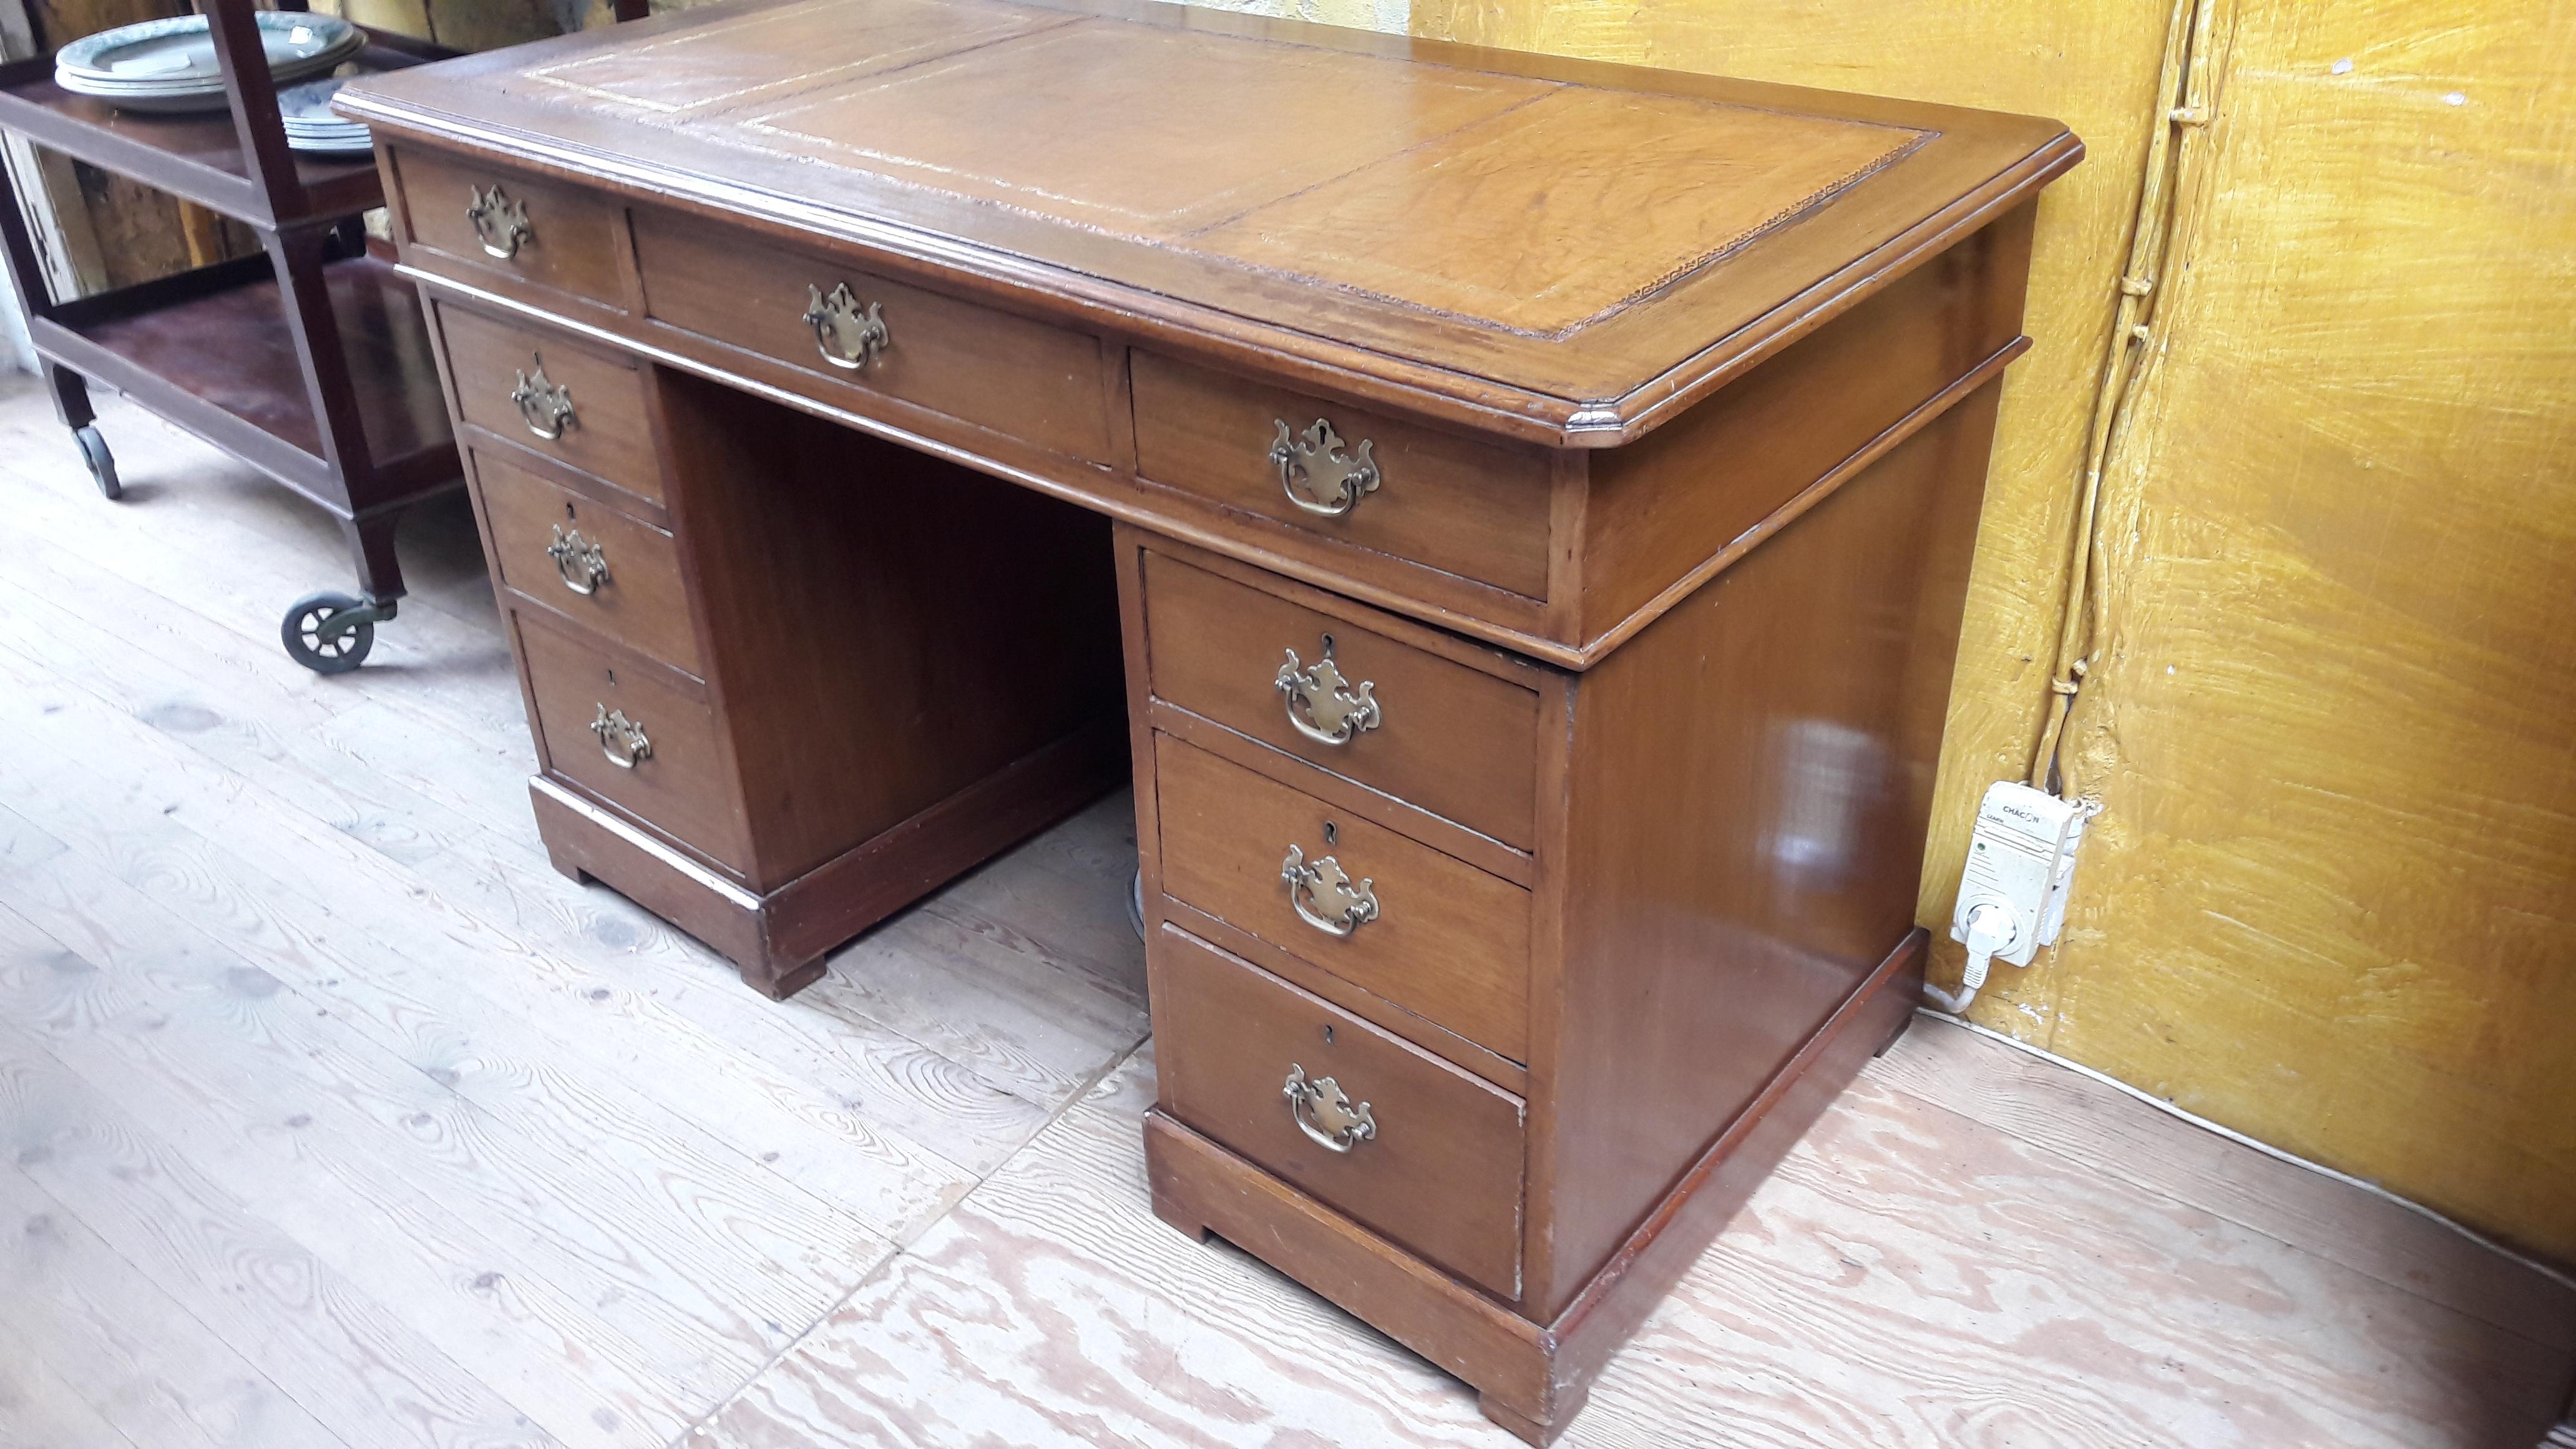 Small pedestal desk with new tan leather. A good quality 1970s English reproduction desk in Georgian style with brass Queen Ann handles.
This desk is in three pieces: a top and two pedestals.
The leather can be changed in other color (with a